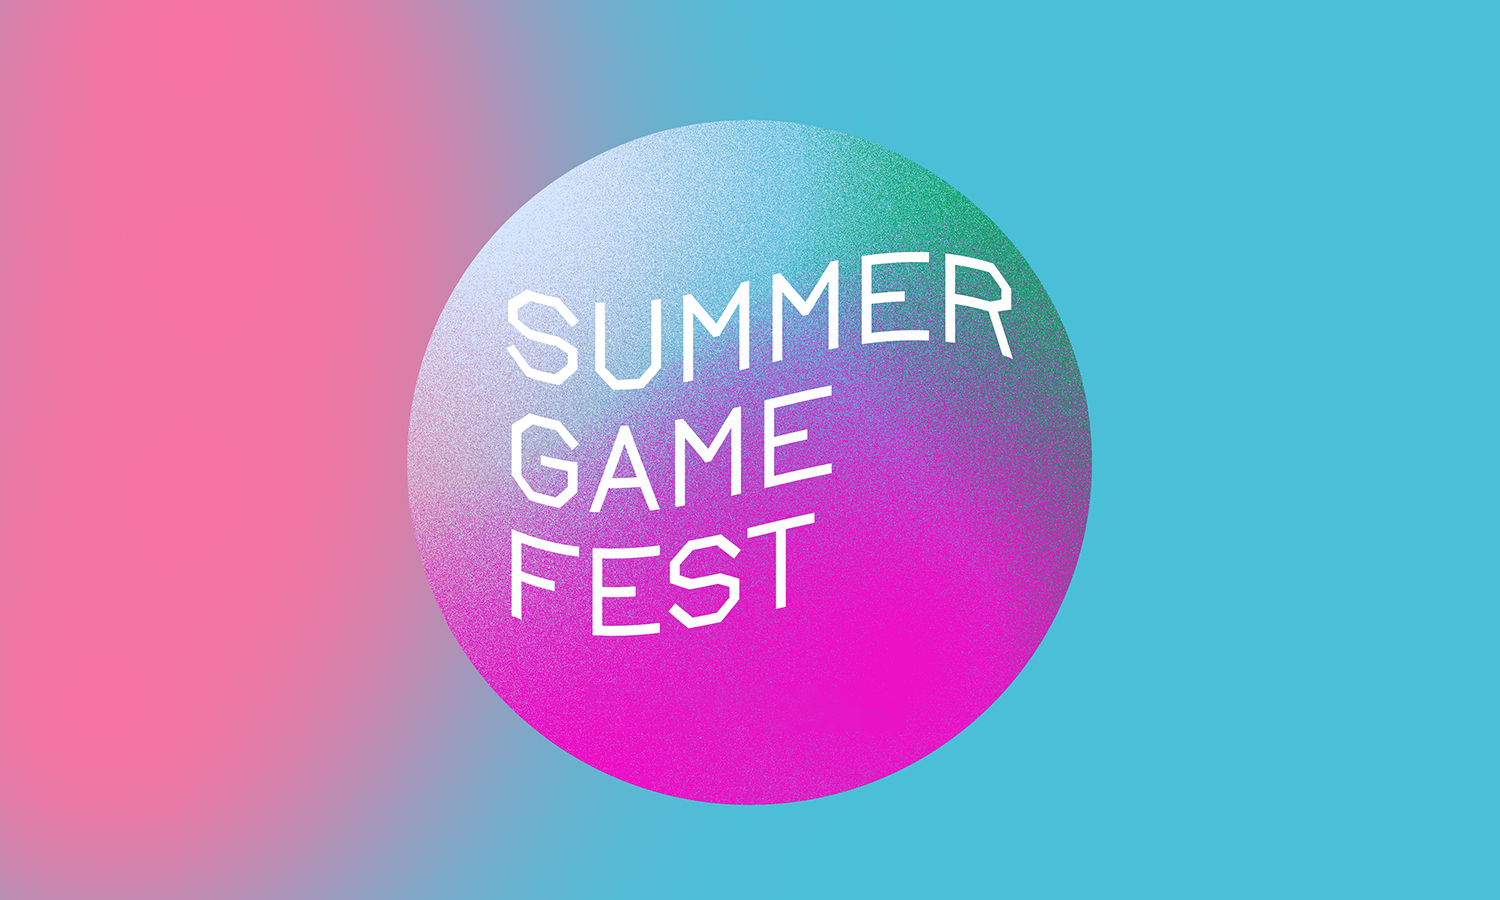 Geoff Keighley’s Summer Game Fest Set for June 2021